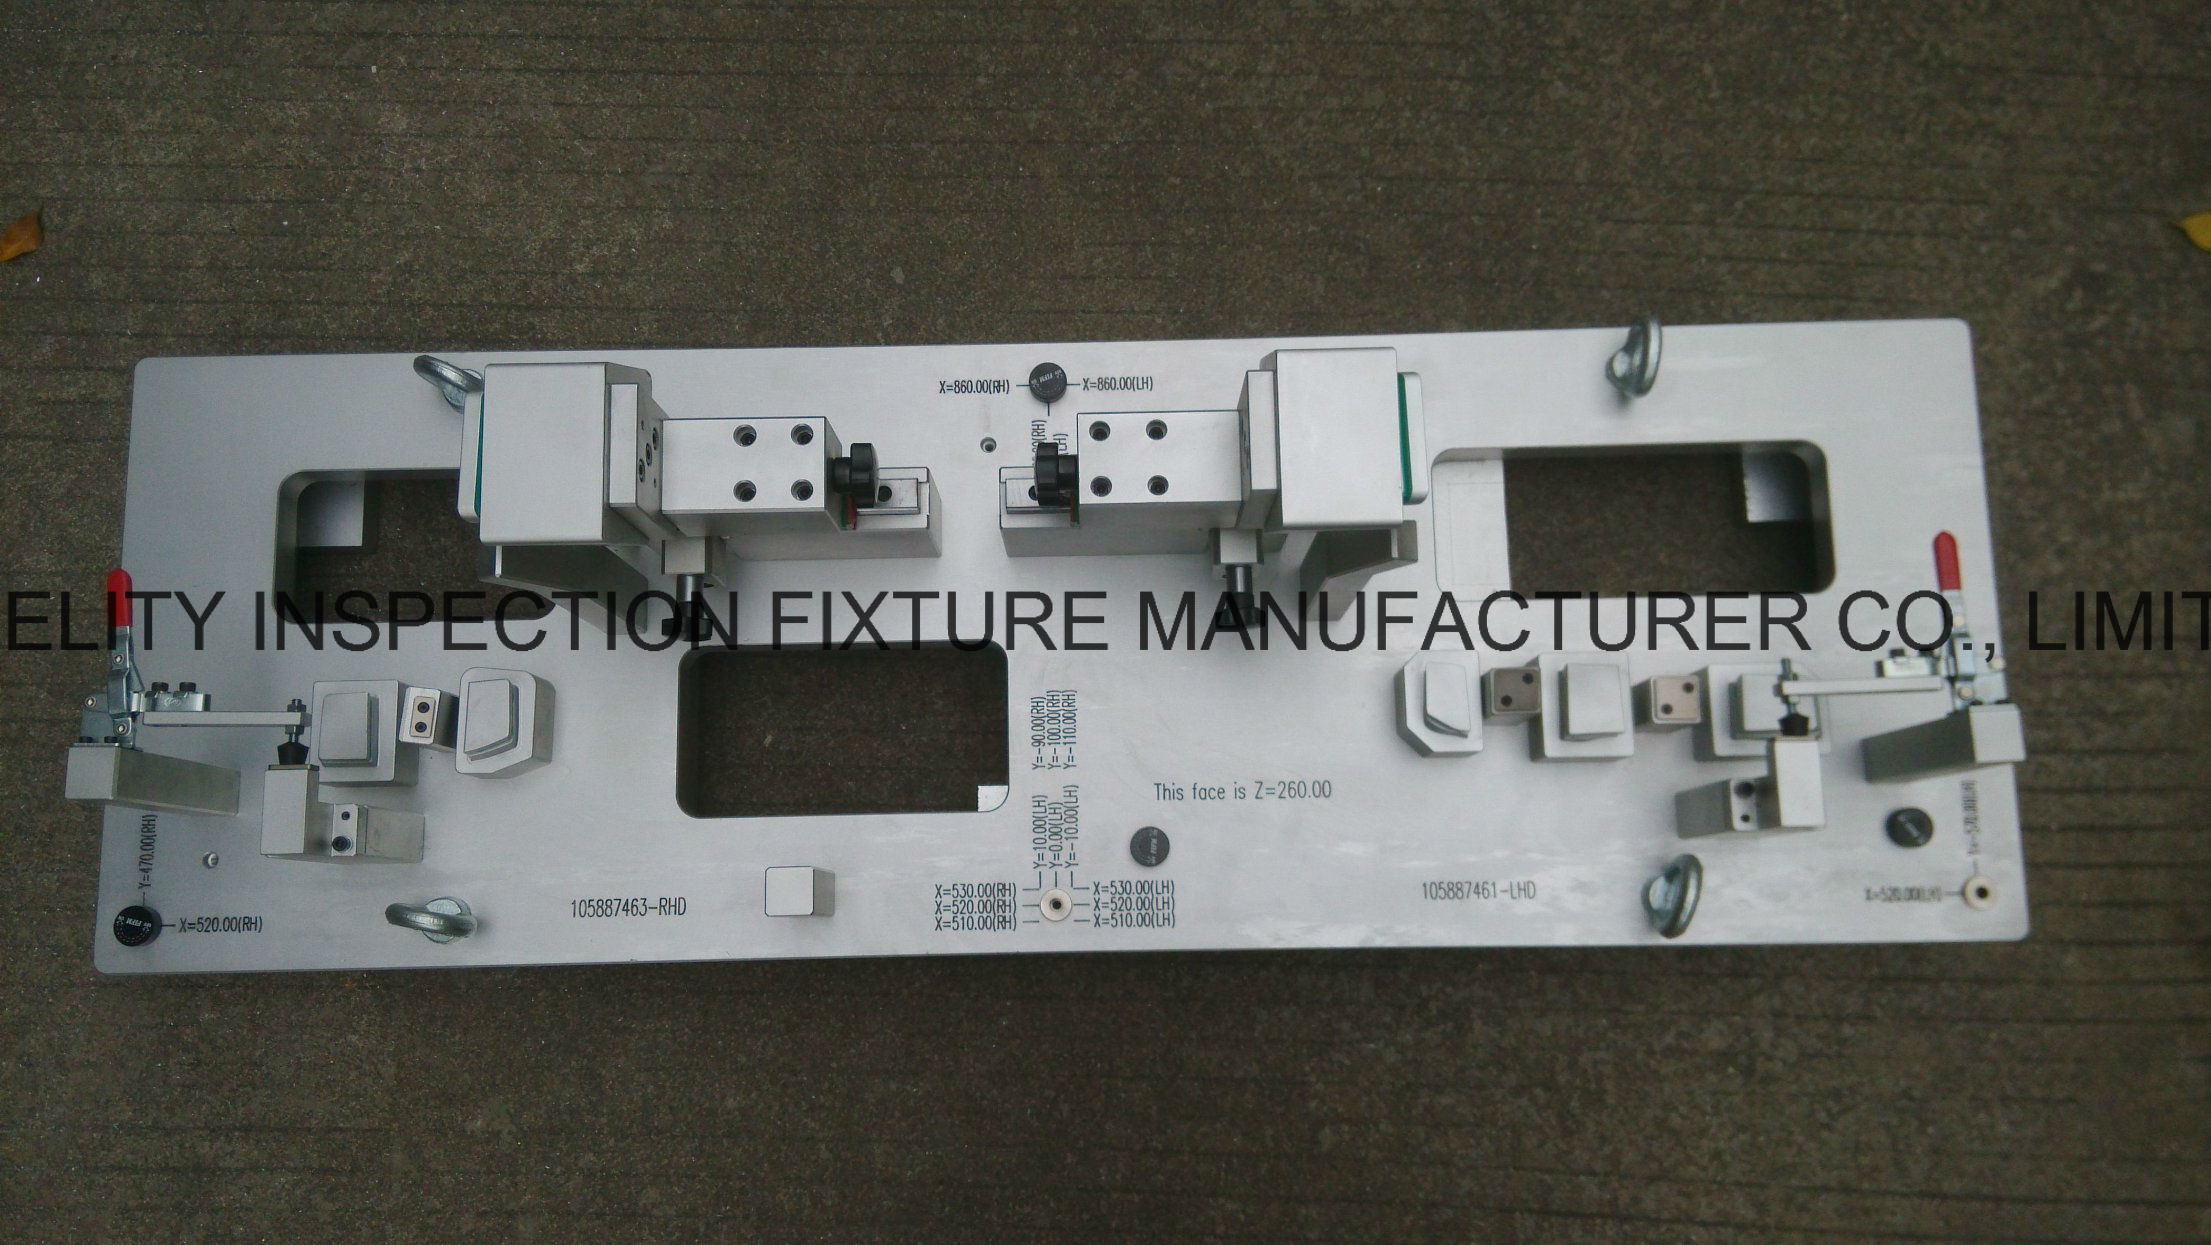 Customized Checking Fixture/Jig/Gauge for BMW Plastic Parts with High Accuracy /CMM Accesibility